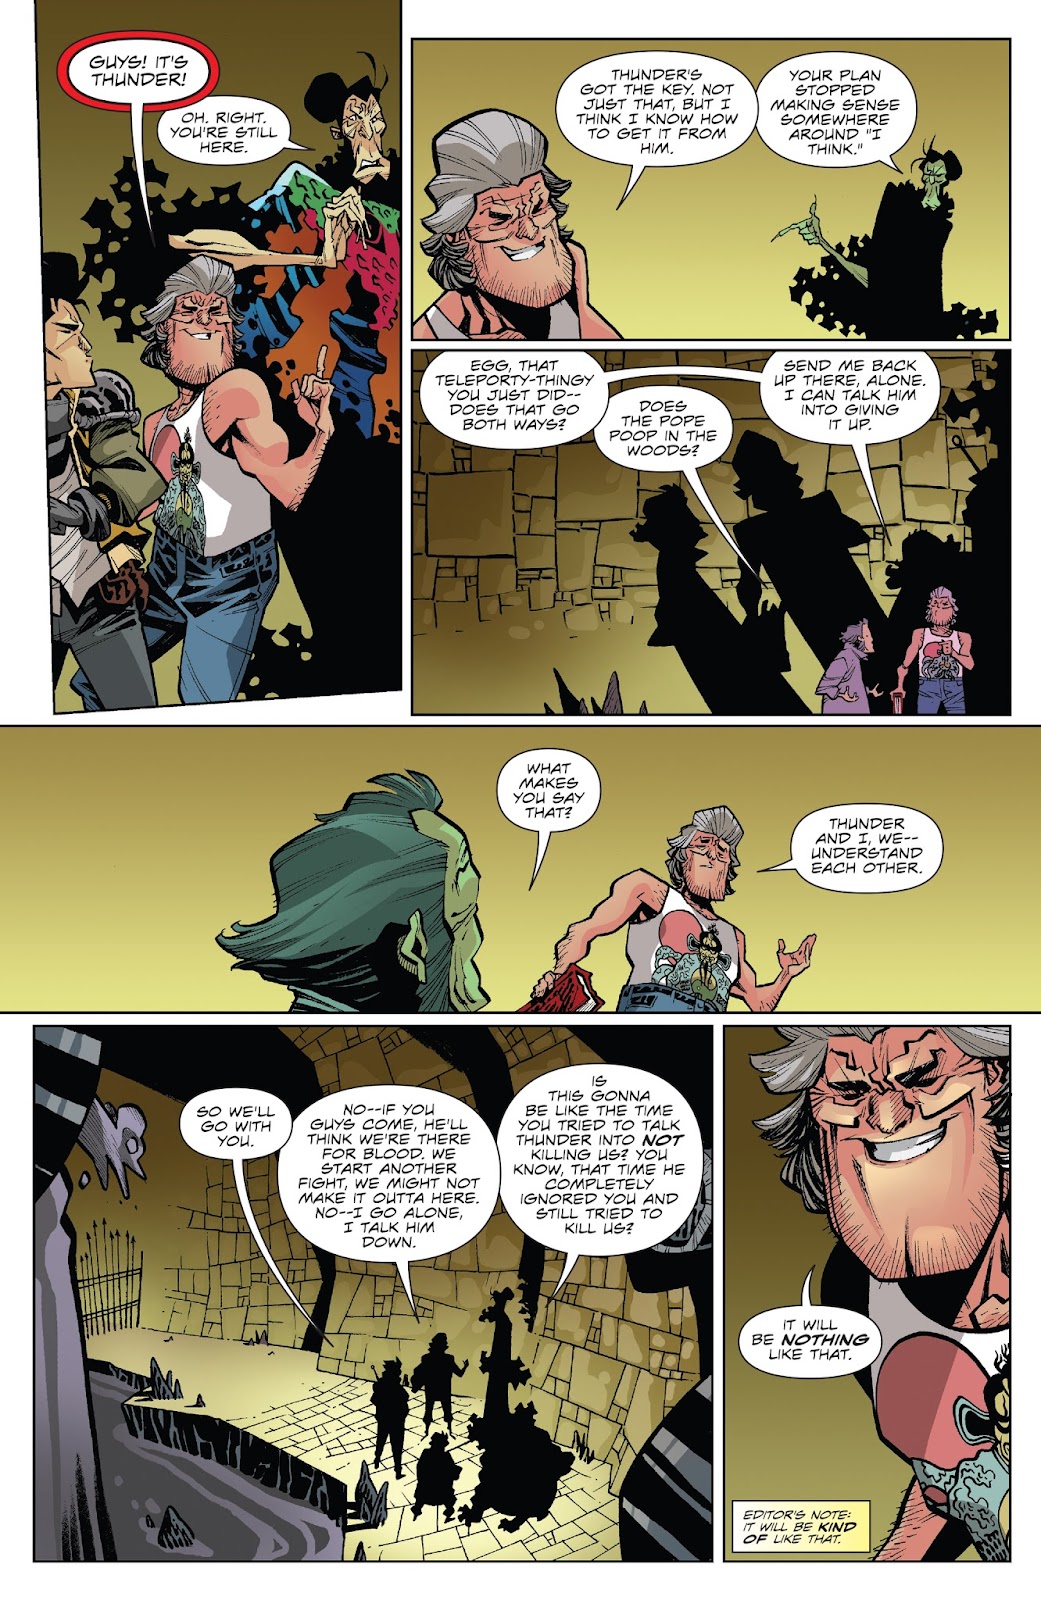 Big Trouble in Little China: Old Man Jack issue 7 - Page 17